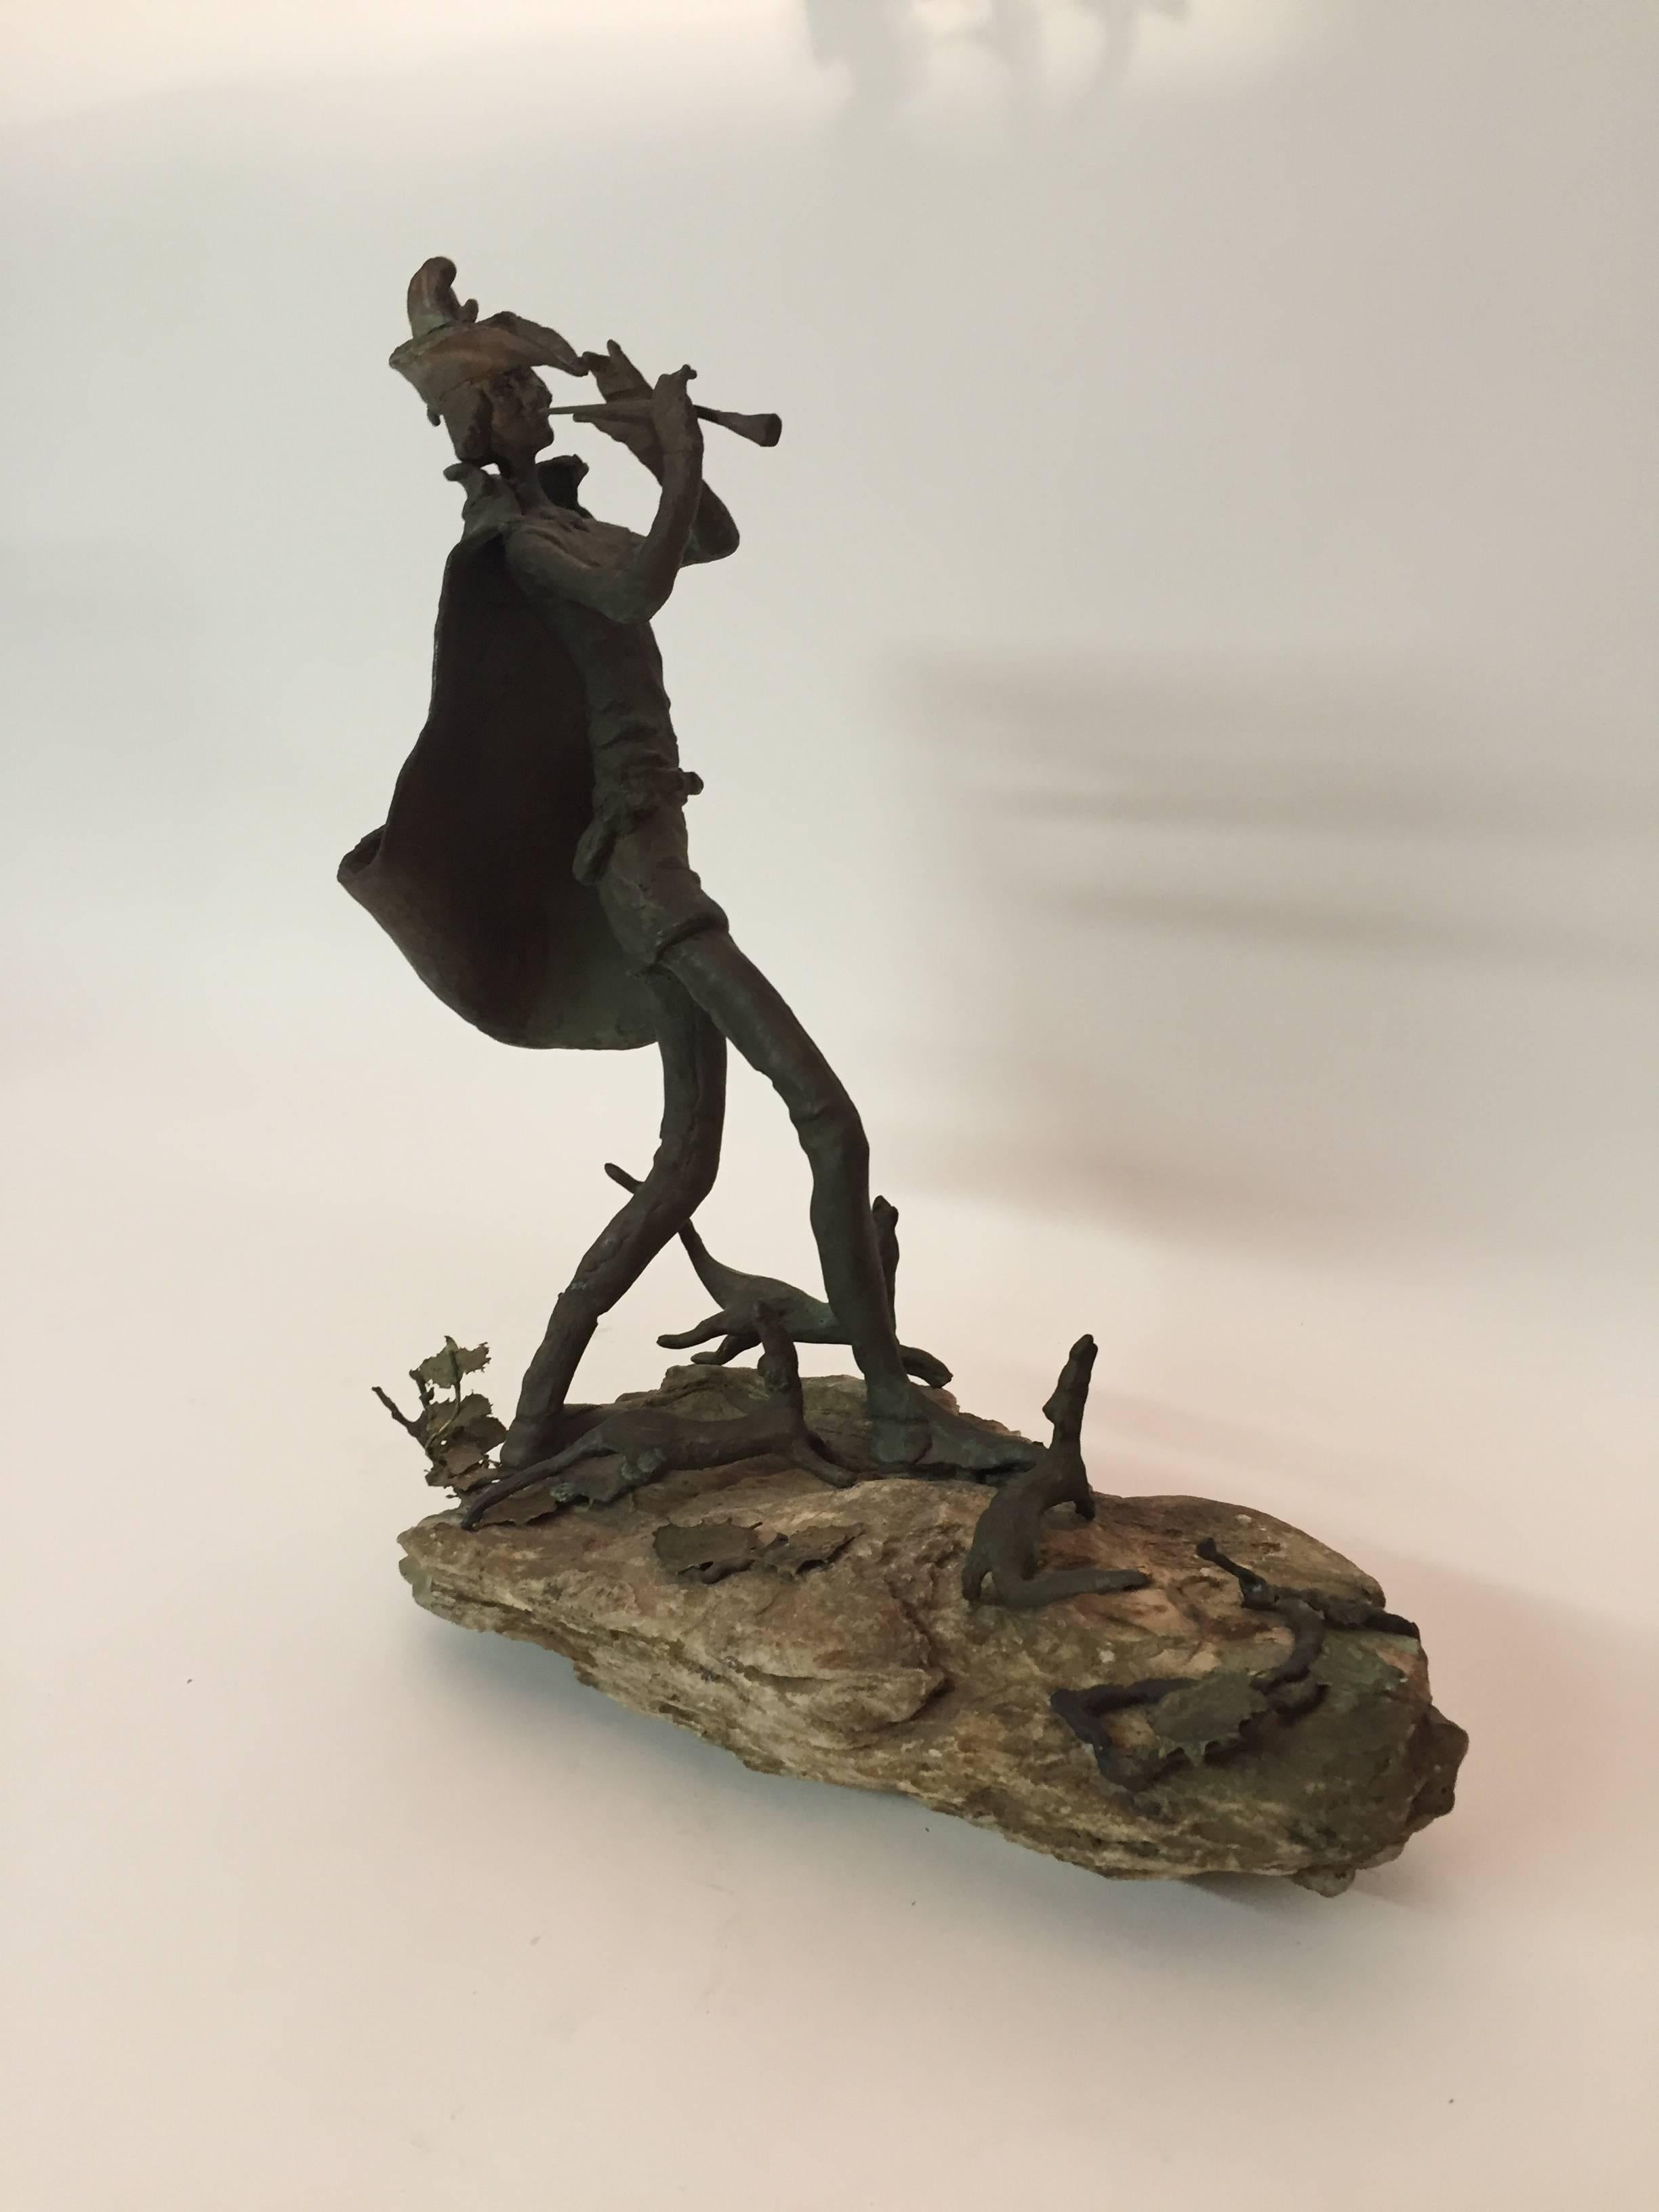 Amazing bronze rendition of the Brothers Grimm tale of the Pied Piper. The artist took a bit of artistic license and depicted dogs. Solid cast bronze sculpture on a petrified wood base. Two of the dogs and a piece of underbrush are free standing and